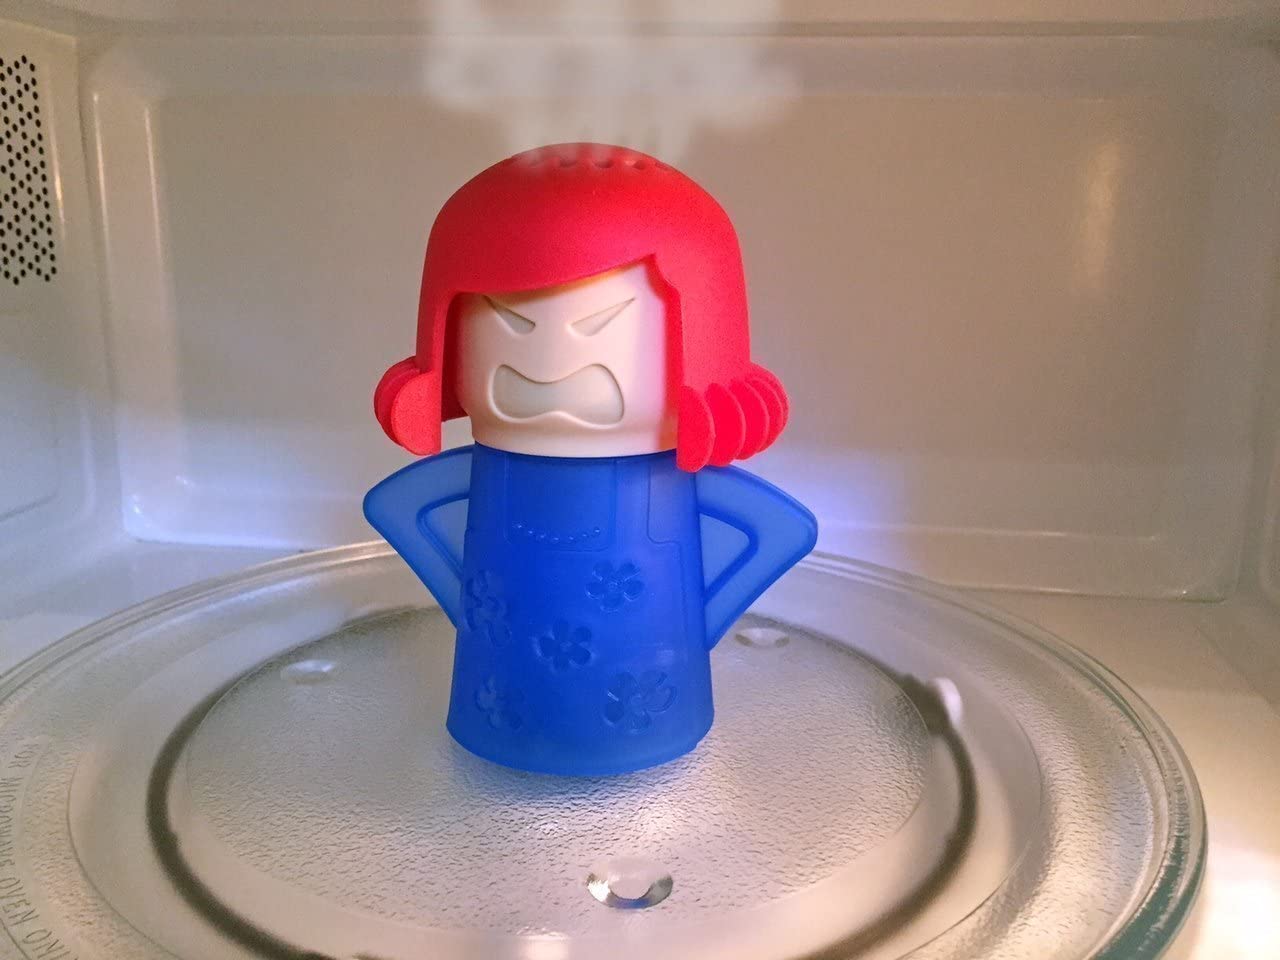 Angry Mama Microwave Cleaner Uses Steam To Clean The Crud Off Microwave